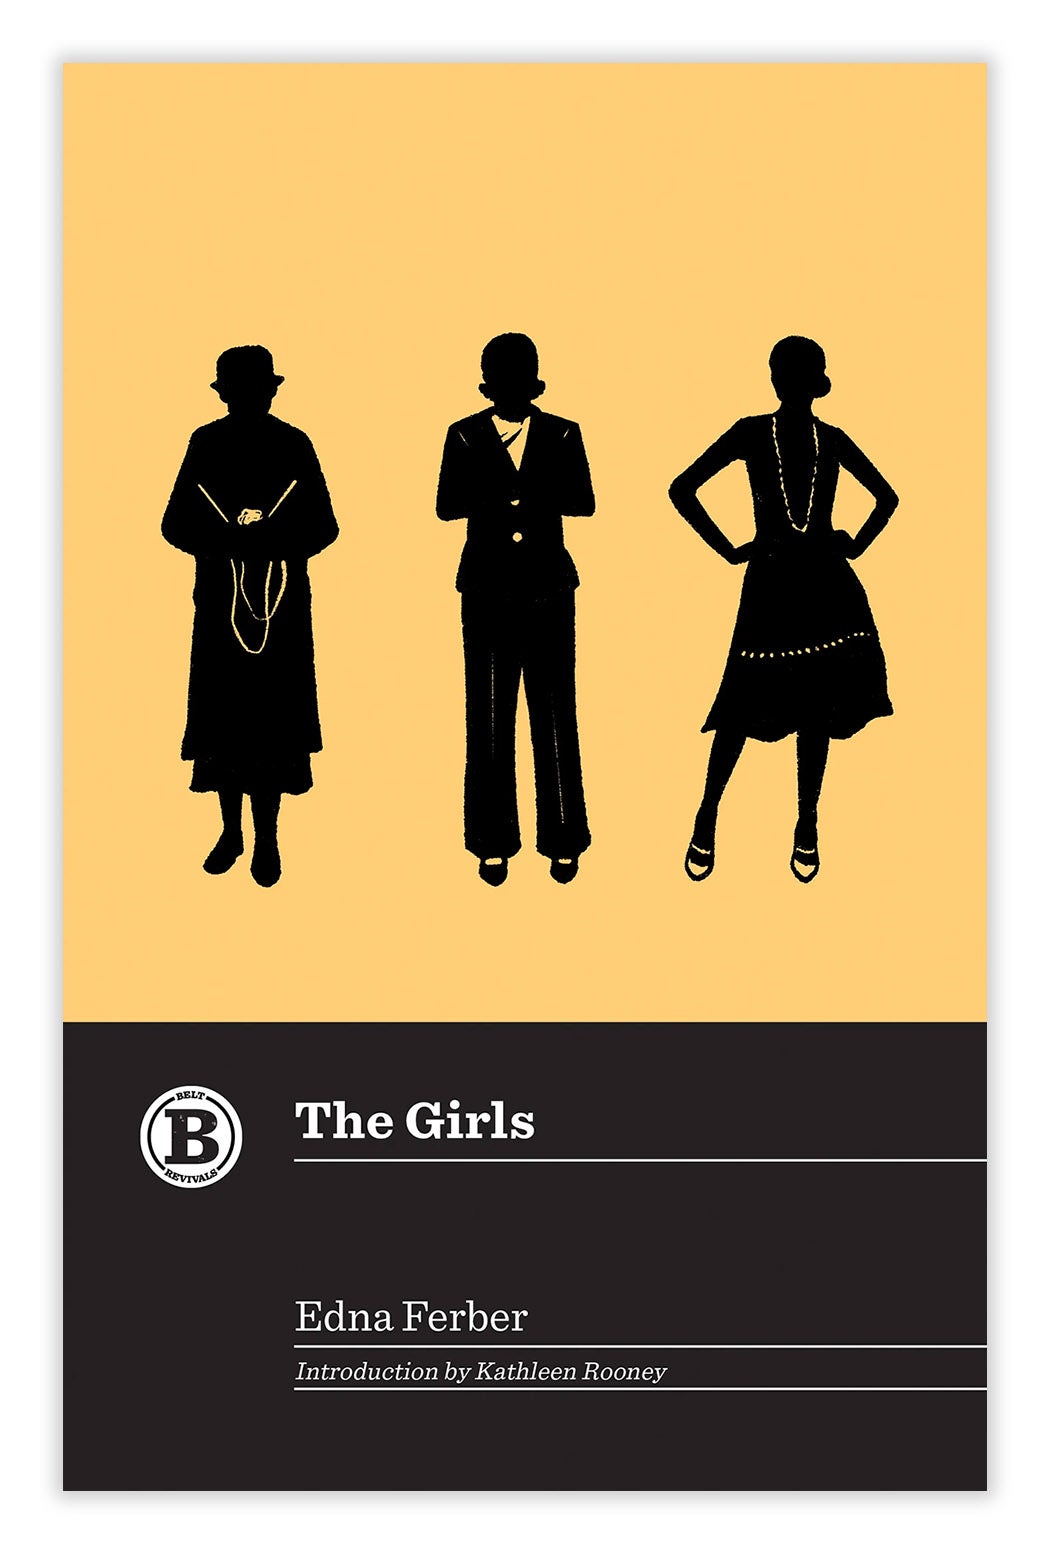 The cover of the Belt Publishing reissue of The Girls